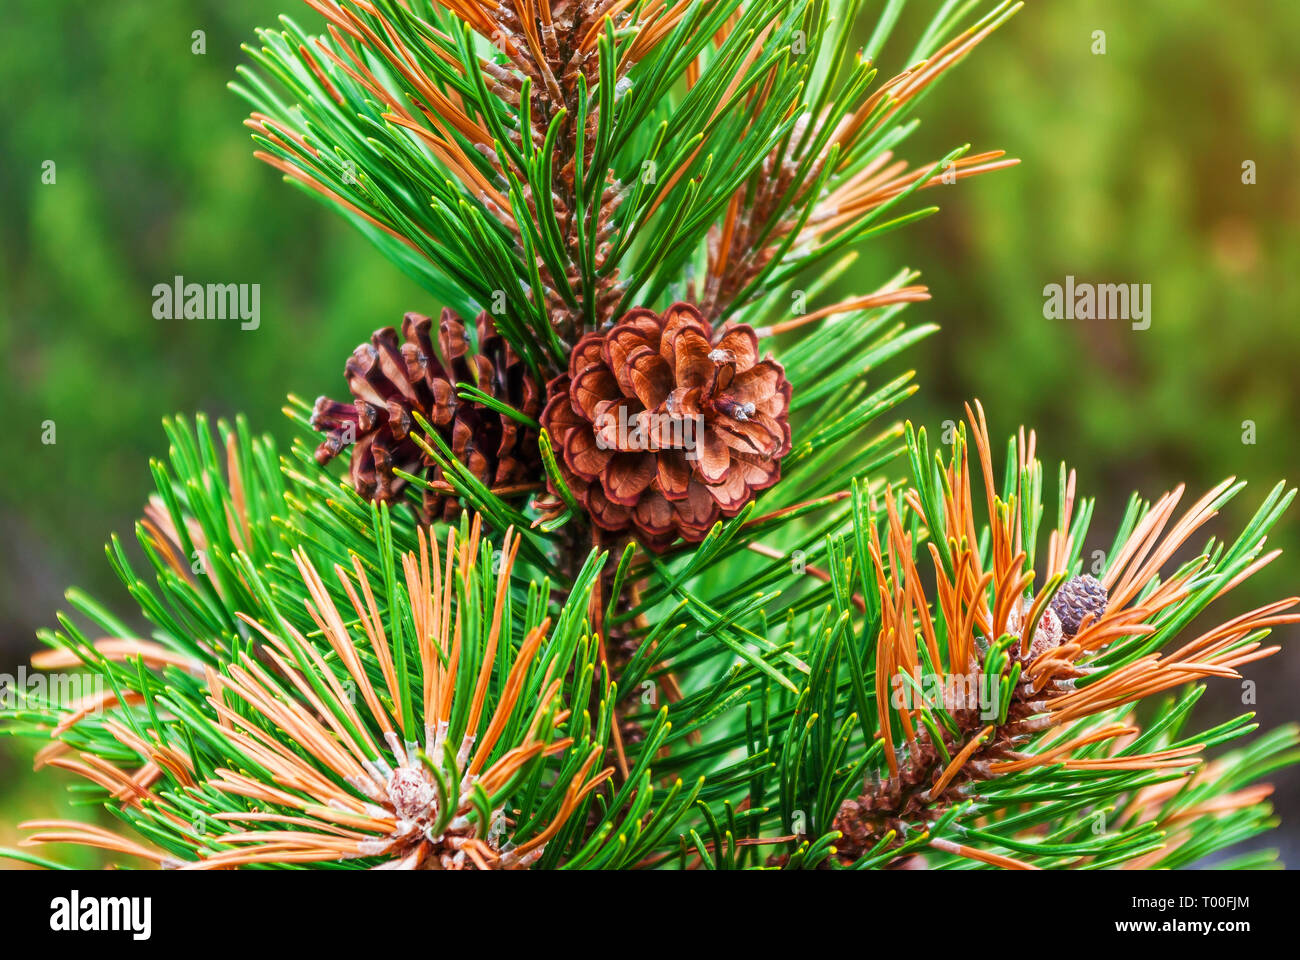 Cones of the Carpathian pine on branch with green needles Stock Photo